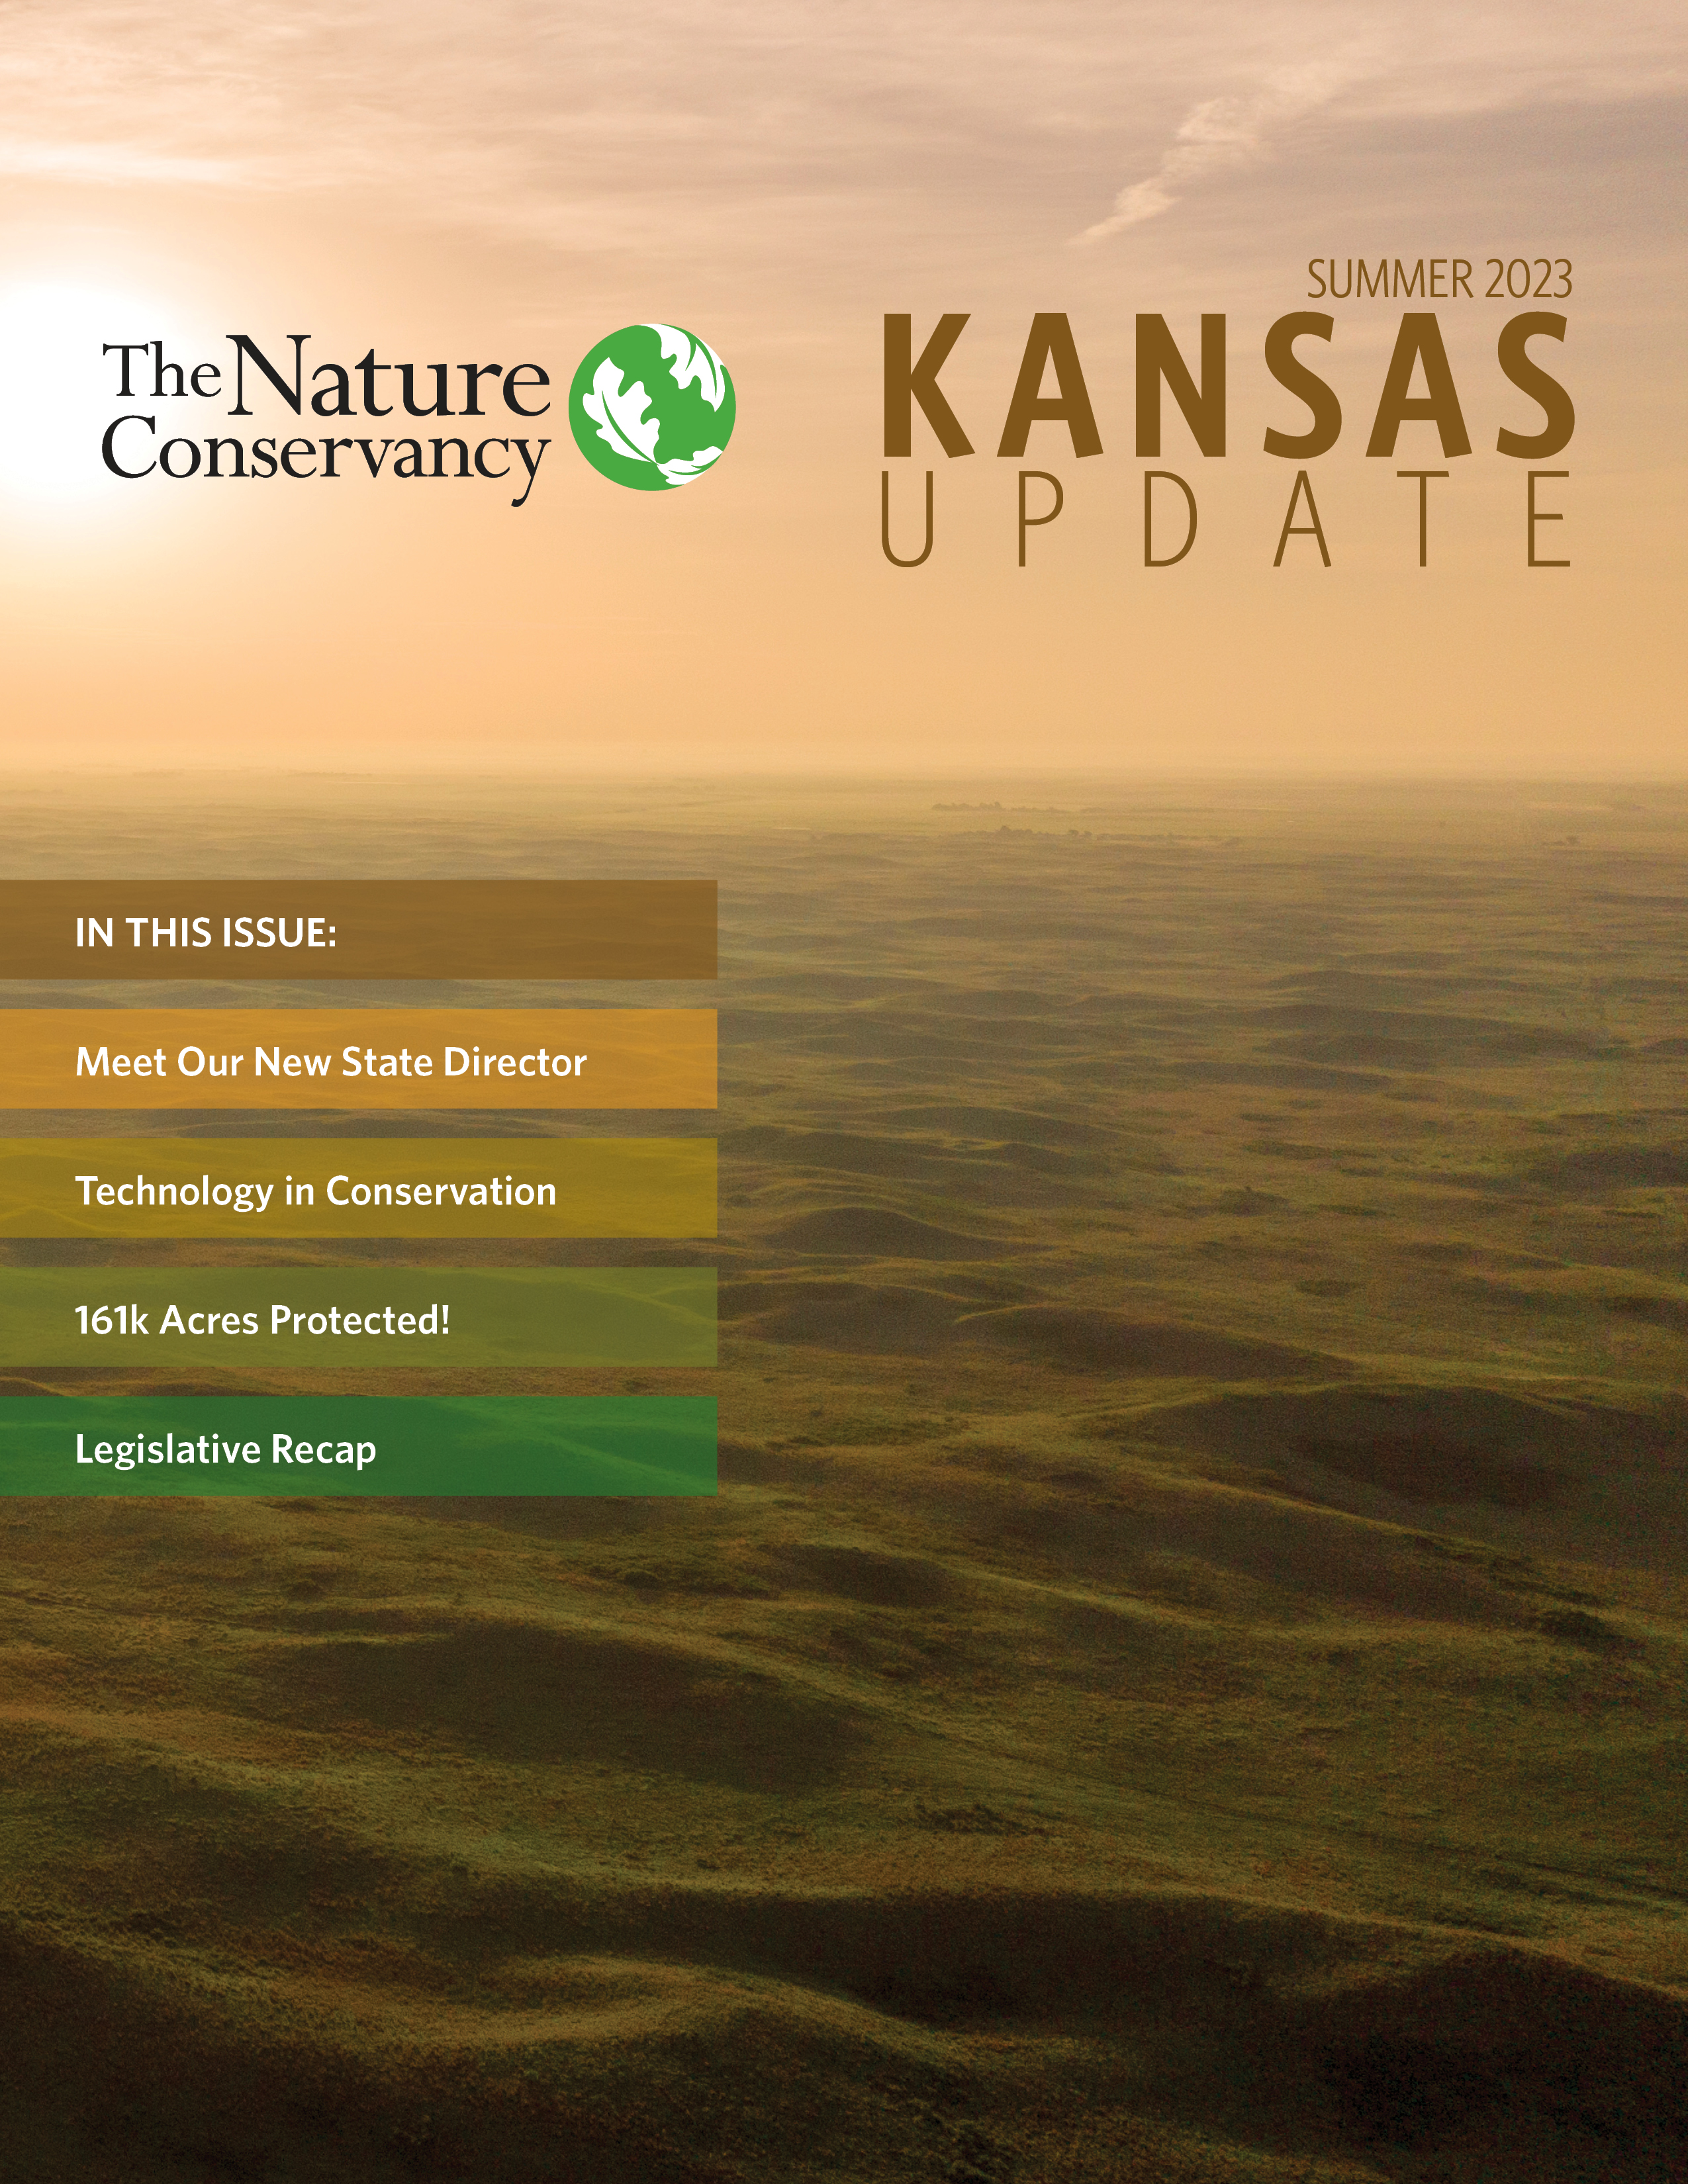 Book cover with aerial image of gentle hills. Title reads: The Nature Conservancy Summer 2023 Kansas Update.